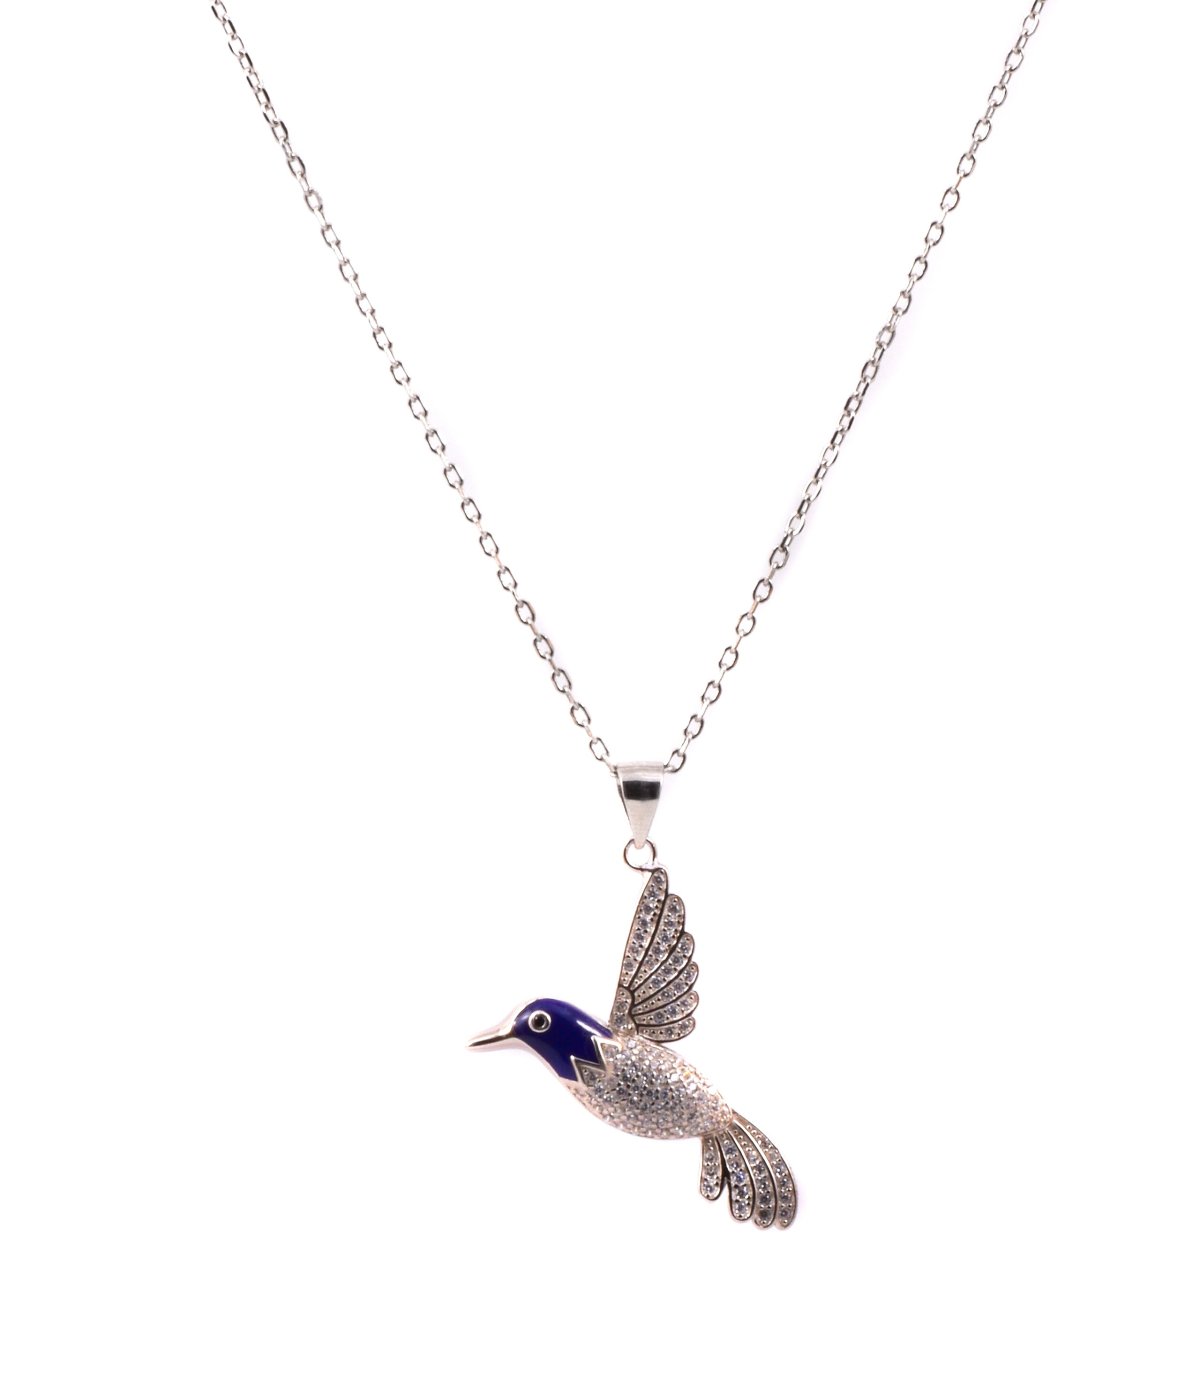 S925 Sterling Silver Chain for Women with Hummingbird Pendant Embelished with Beautiful Crystals